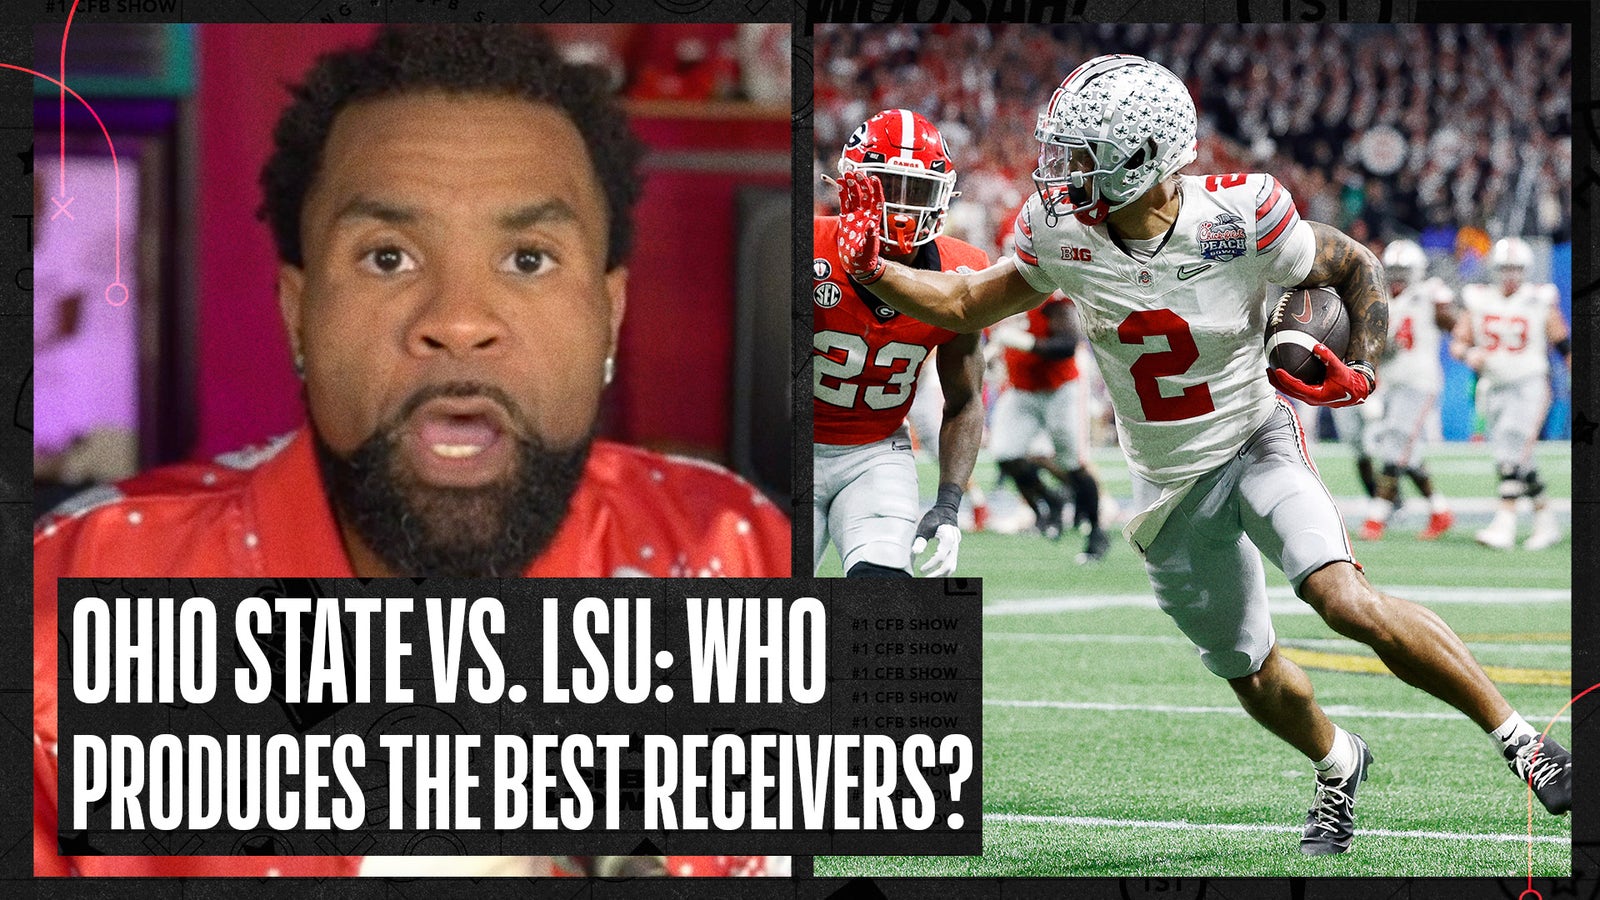 Ohio State & LSU VERSUS series: Which school produces better wide receivers? 